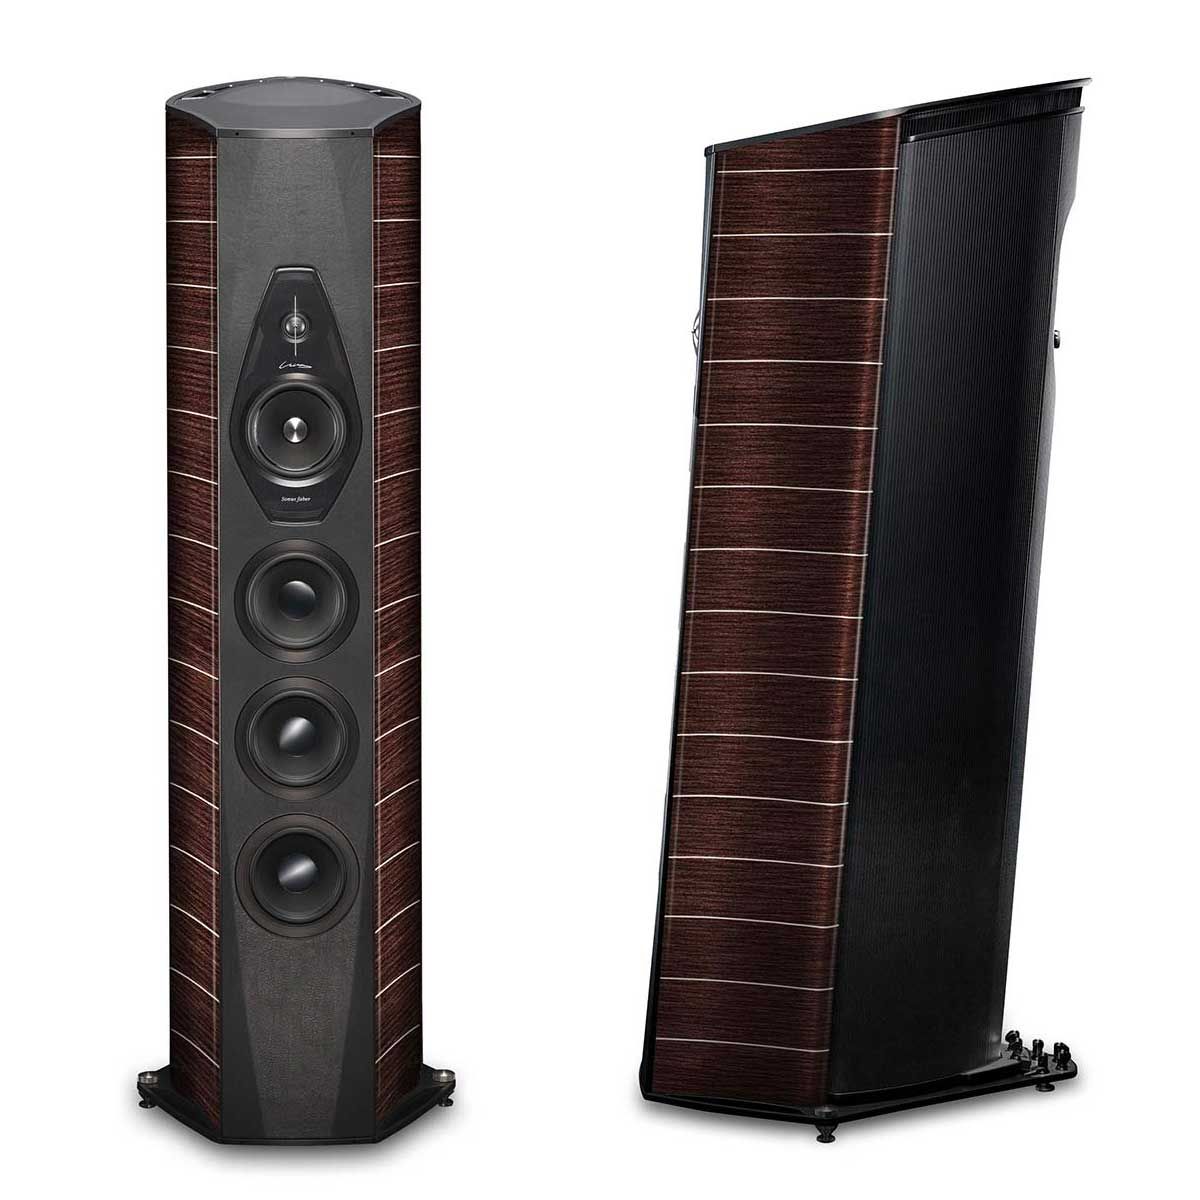 Front and side view of Sonus Faber Lilium Tower Speakers in wenge